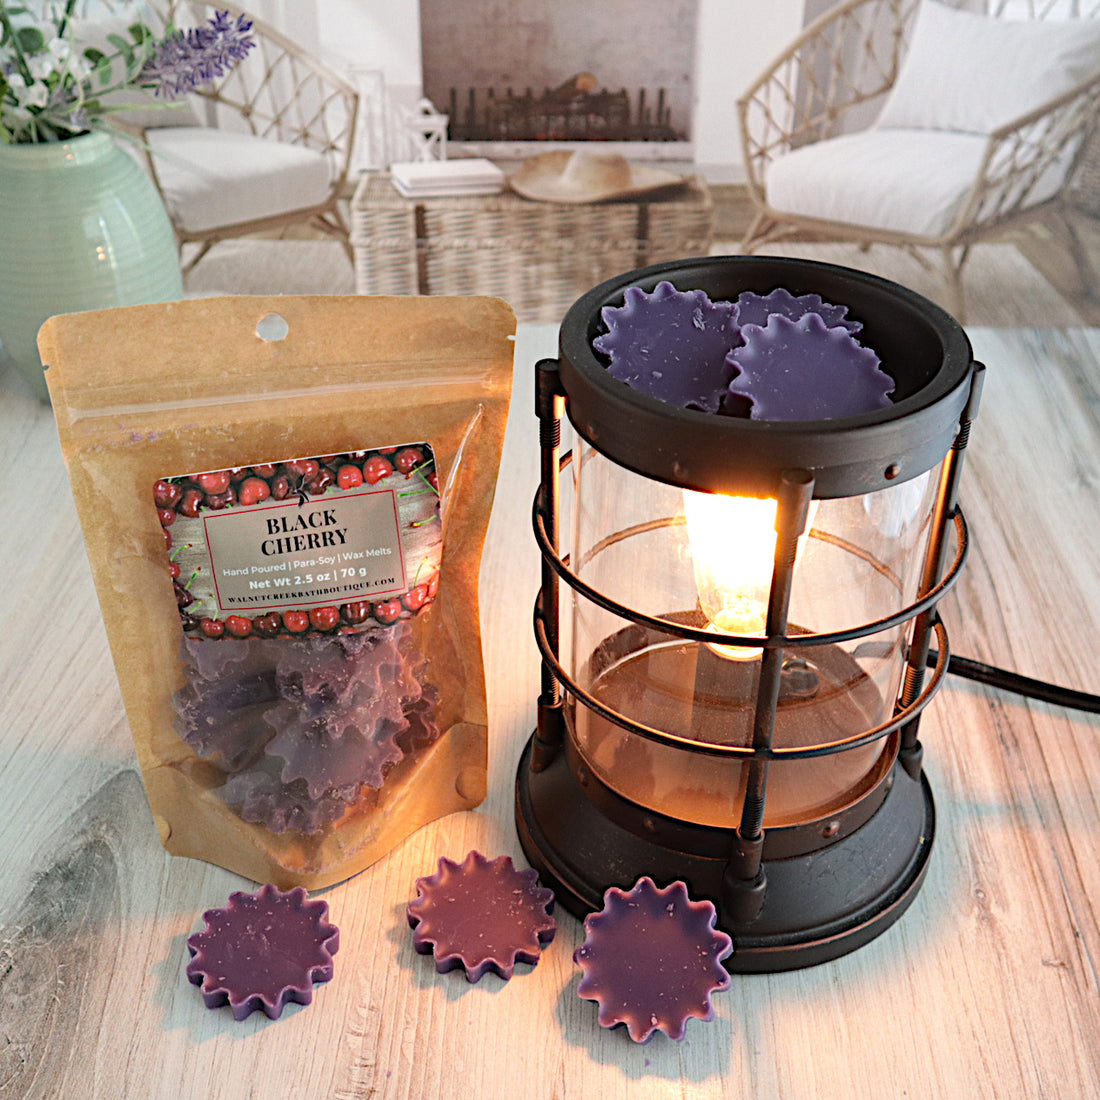 Black cherry wax melts in a bag is standing next to a burner that is lit and also have the cute starburst shaped purple wax melts in the dish just waiting to melt. there are more wax melts on the table in front of the bag and burner. this is all sitting on a washed out wooden base with a couple of chairs in the background next to a fireplace